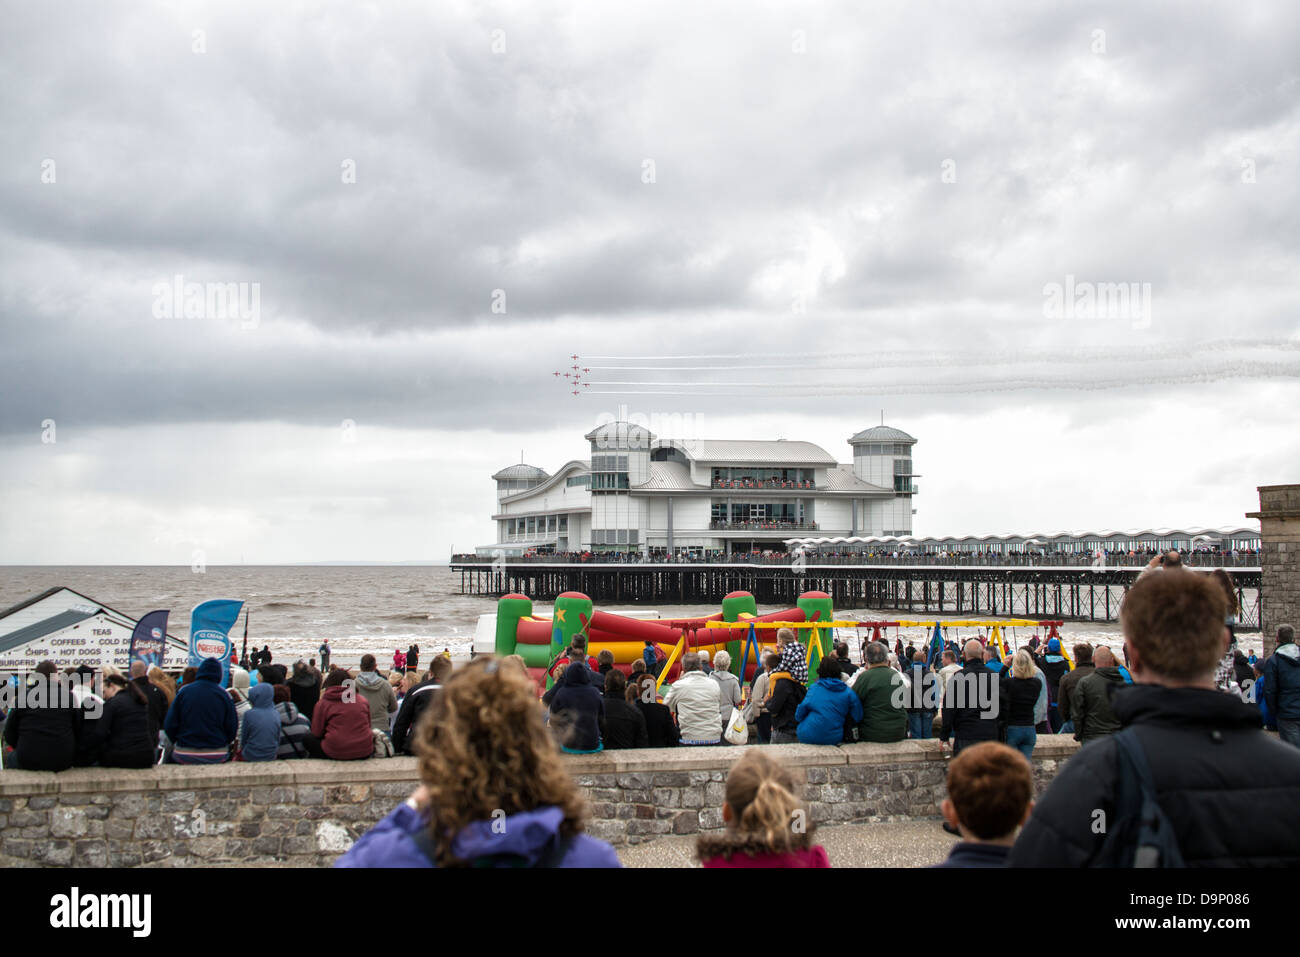 The crowds enjoy the British Red Arrows aerobatic display team perform over the Grand Pier at Weston Super Mare Stock Photo